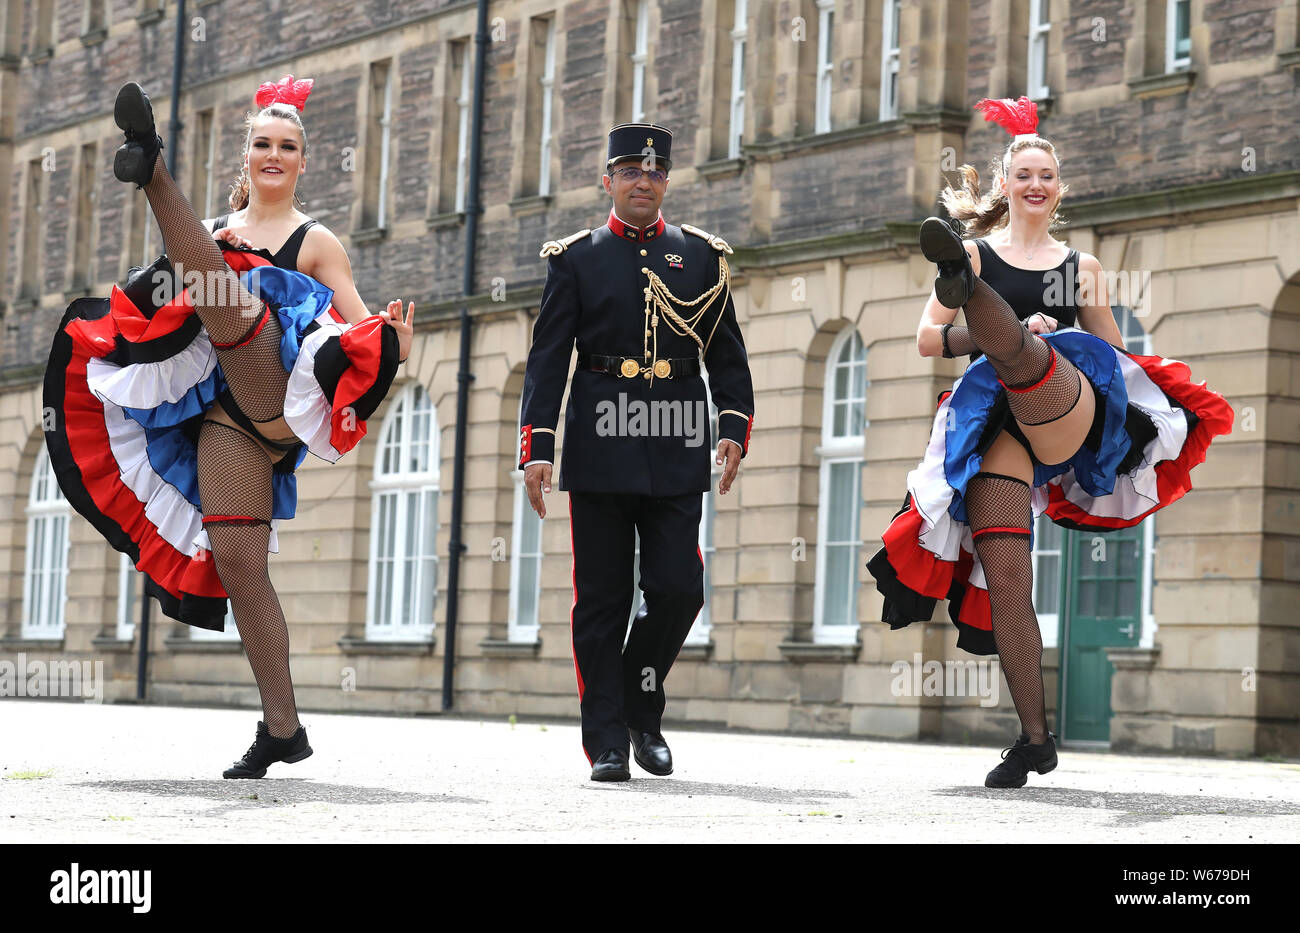 Adjutant chef Jean Michel Gatta from France is shown the Can Can dance by dancers Elia Roedaniel (left) and Caroline Drummond (right) as they take a break rehearsal during a rehearsal of the Royal Edinburgh Military Tattoo of 2019 at Redford Barracks in Edinburgh. The theme this year is Kaleidoscope and almost 1,200 cast members from all over the world are taking part. Stock Photo